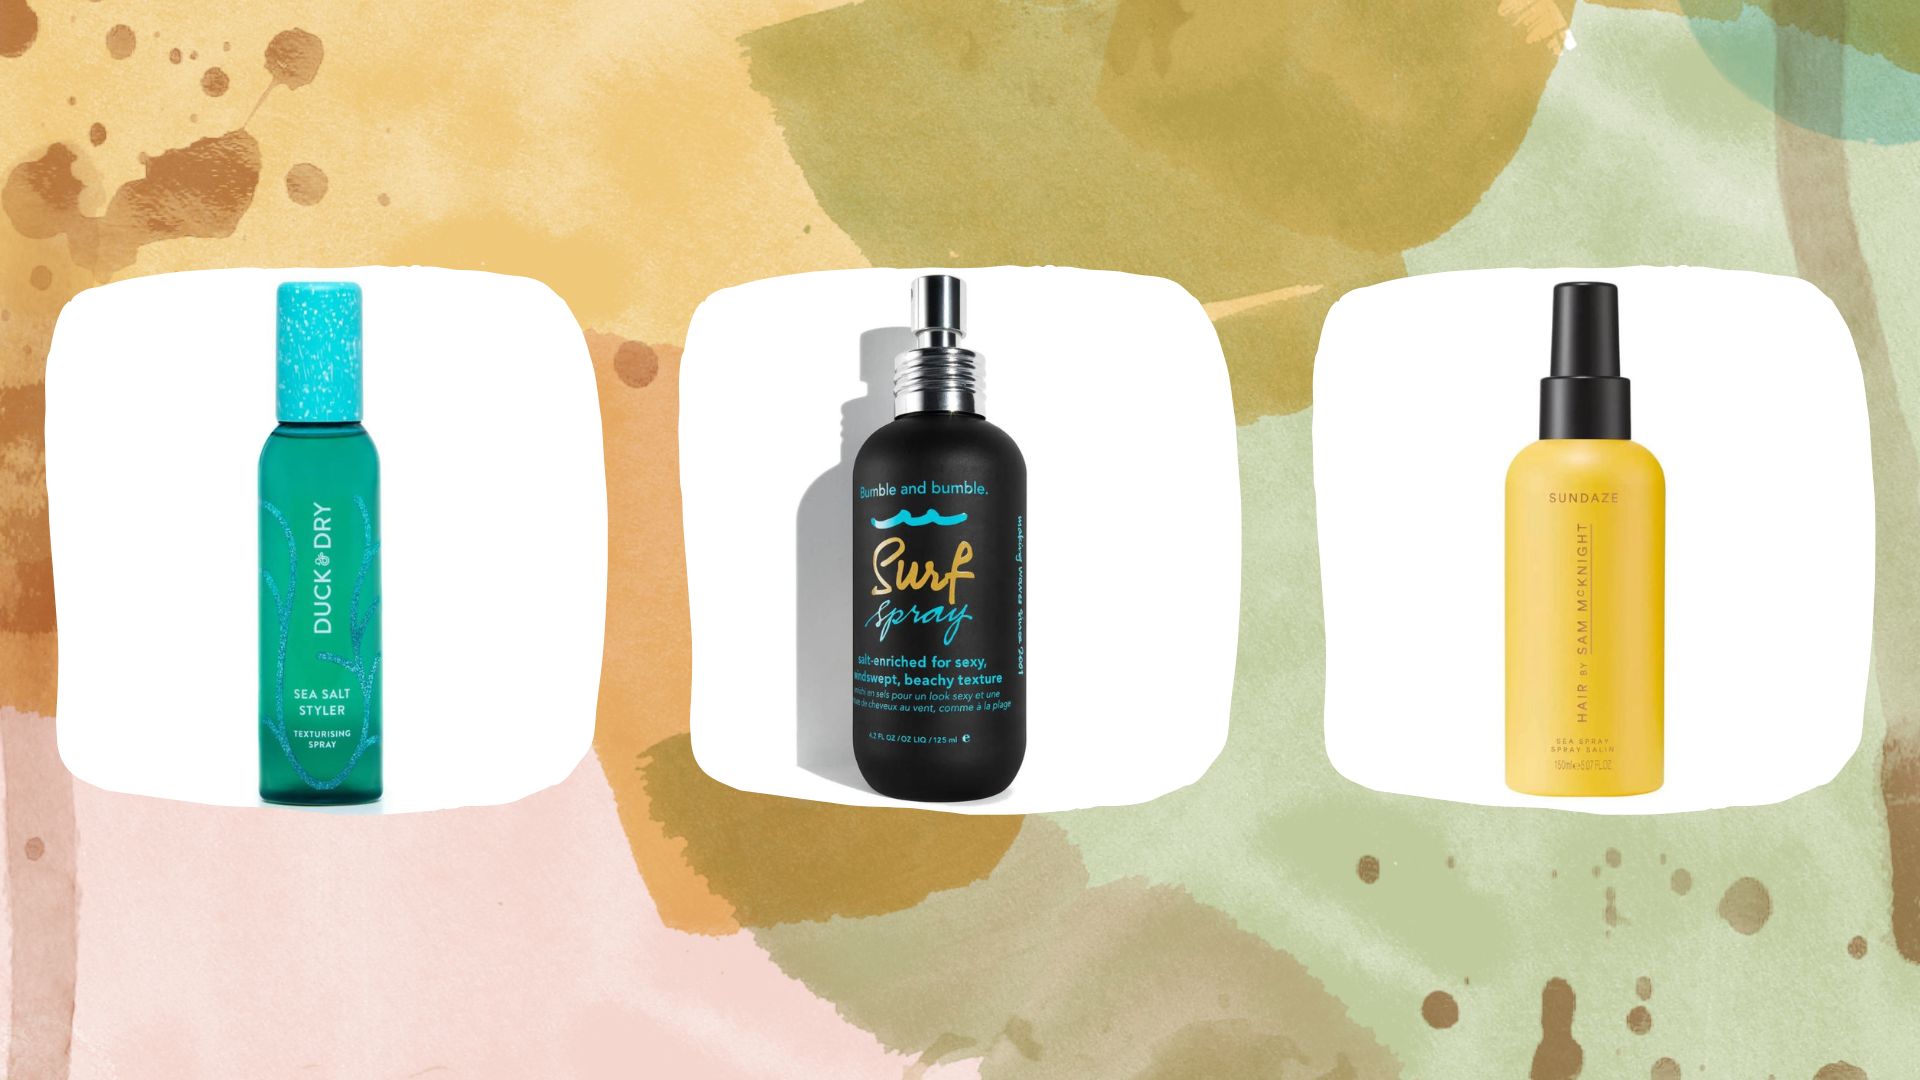 Bumble and Bumble Surf Spray Review - Really Ree